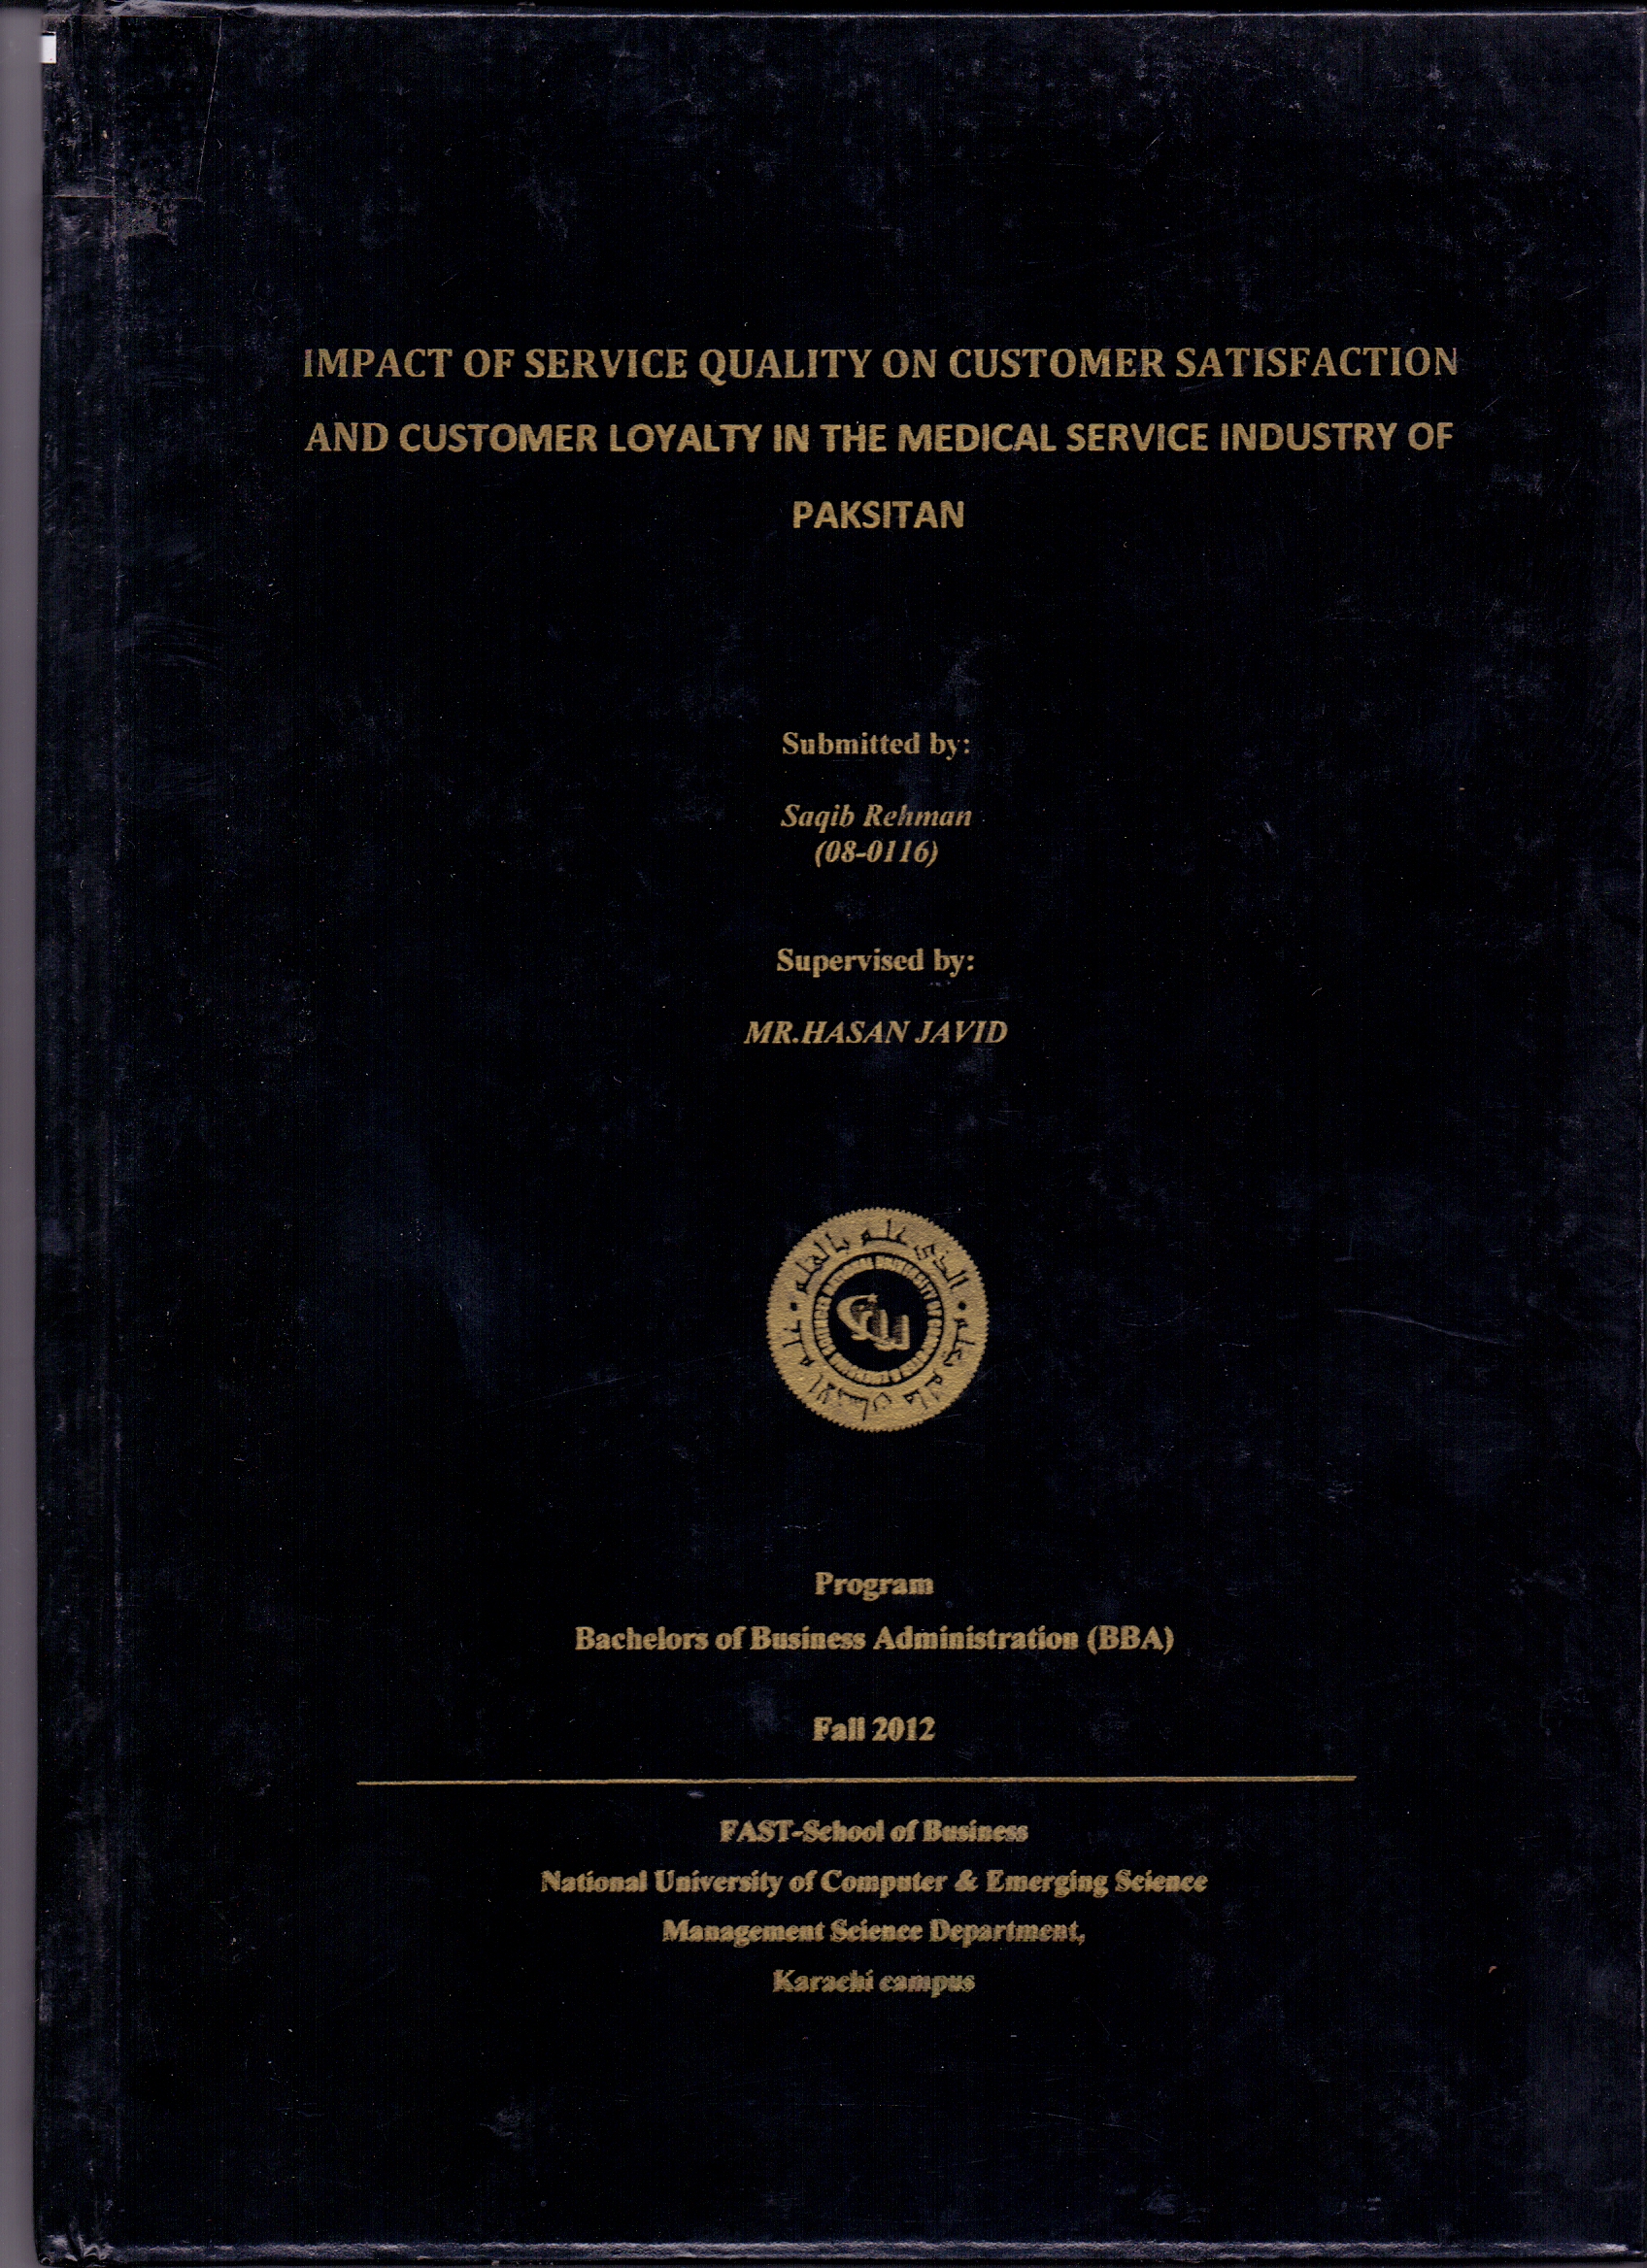 Impact of Sevices Quality on Customer Satisfaction & Customer Loyalty in the Medical Service Industry of Pakistan   (08-0116)